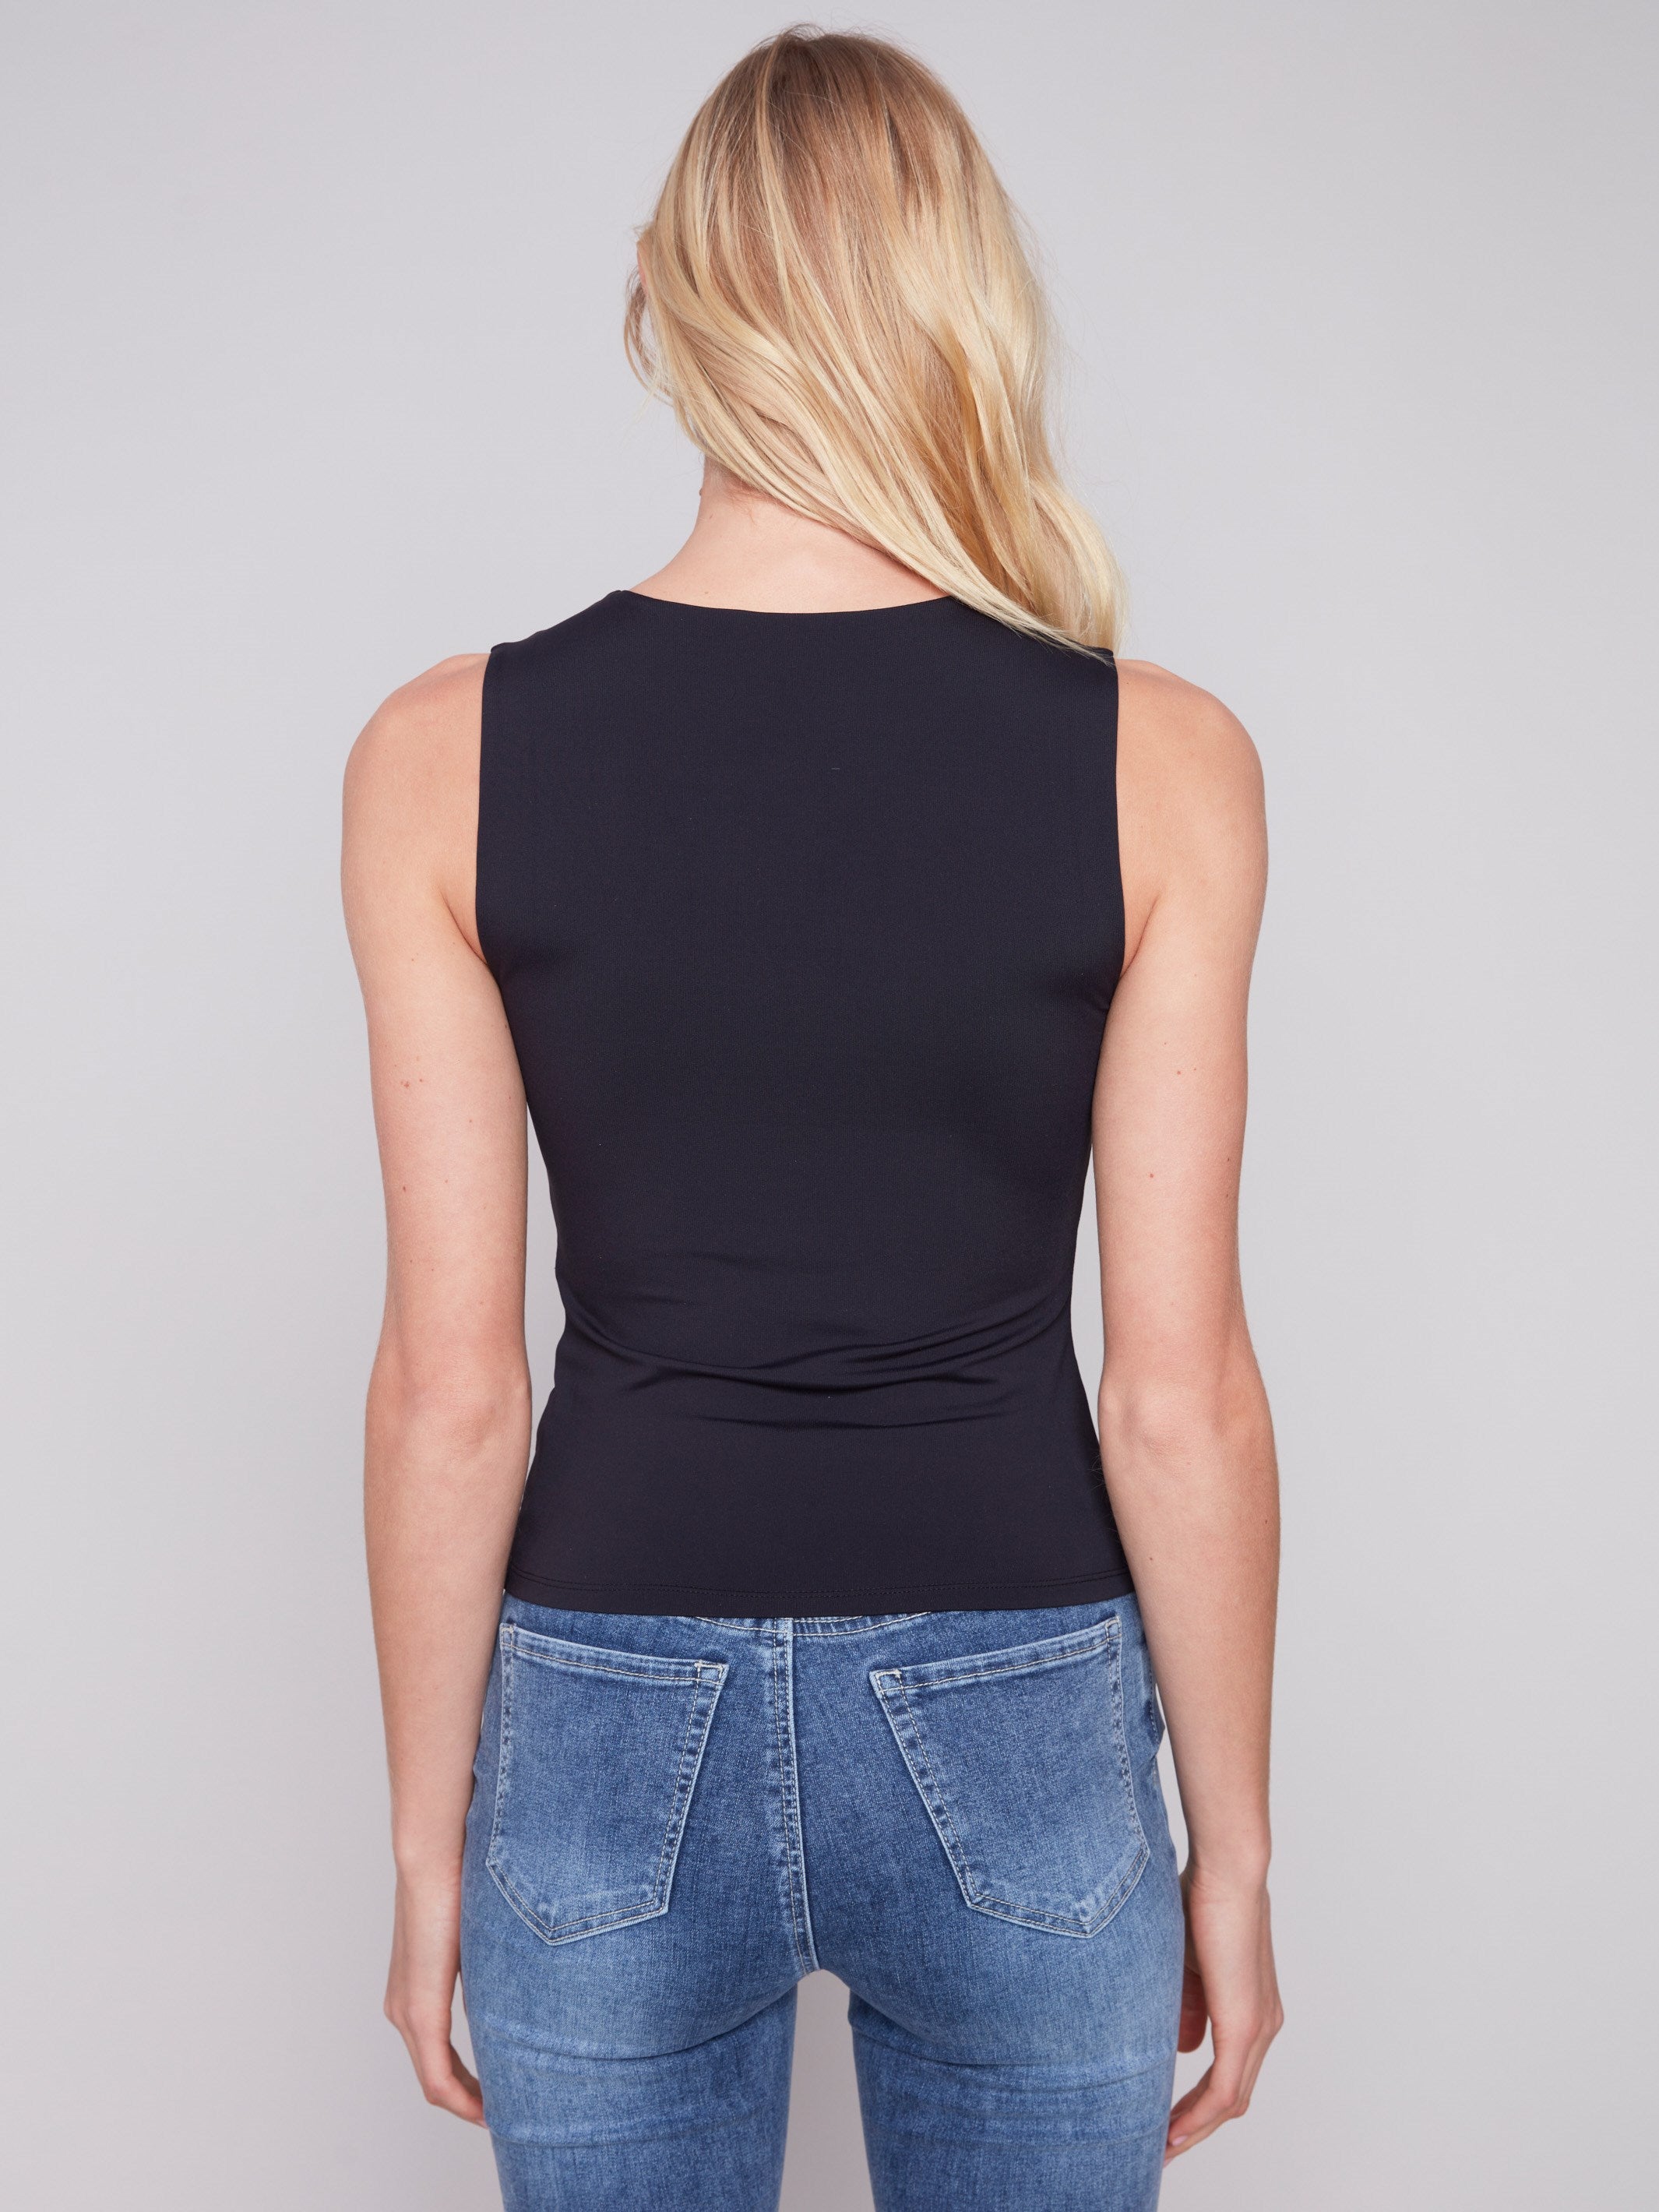 Sleeveless Super Stretch Top - Black - Charlie B Collection Canada - Image 3